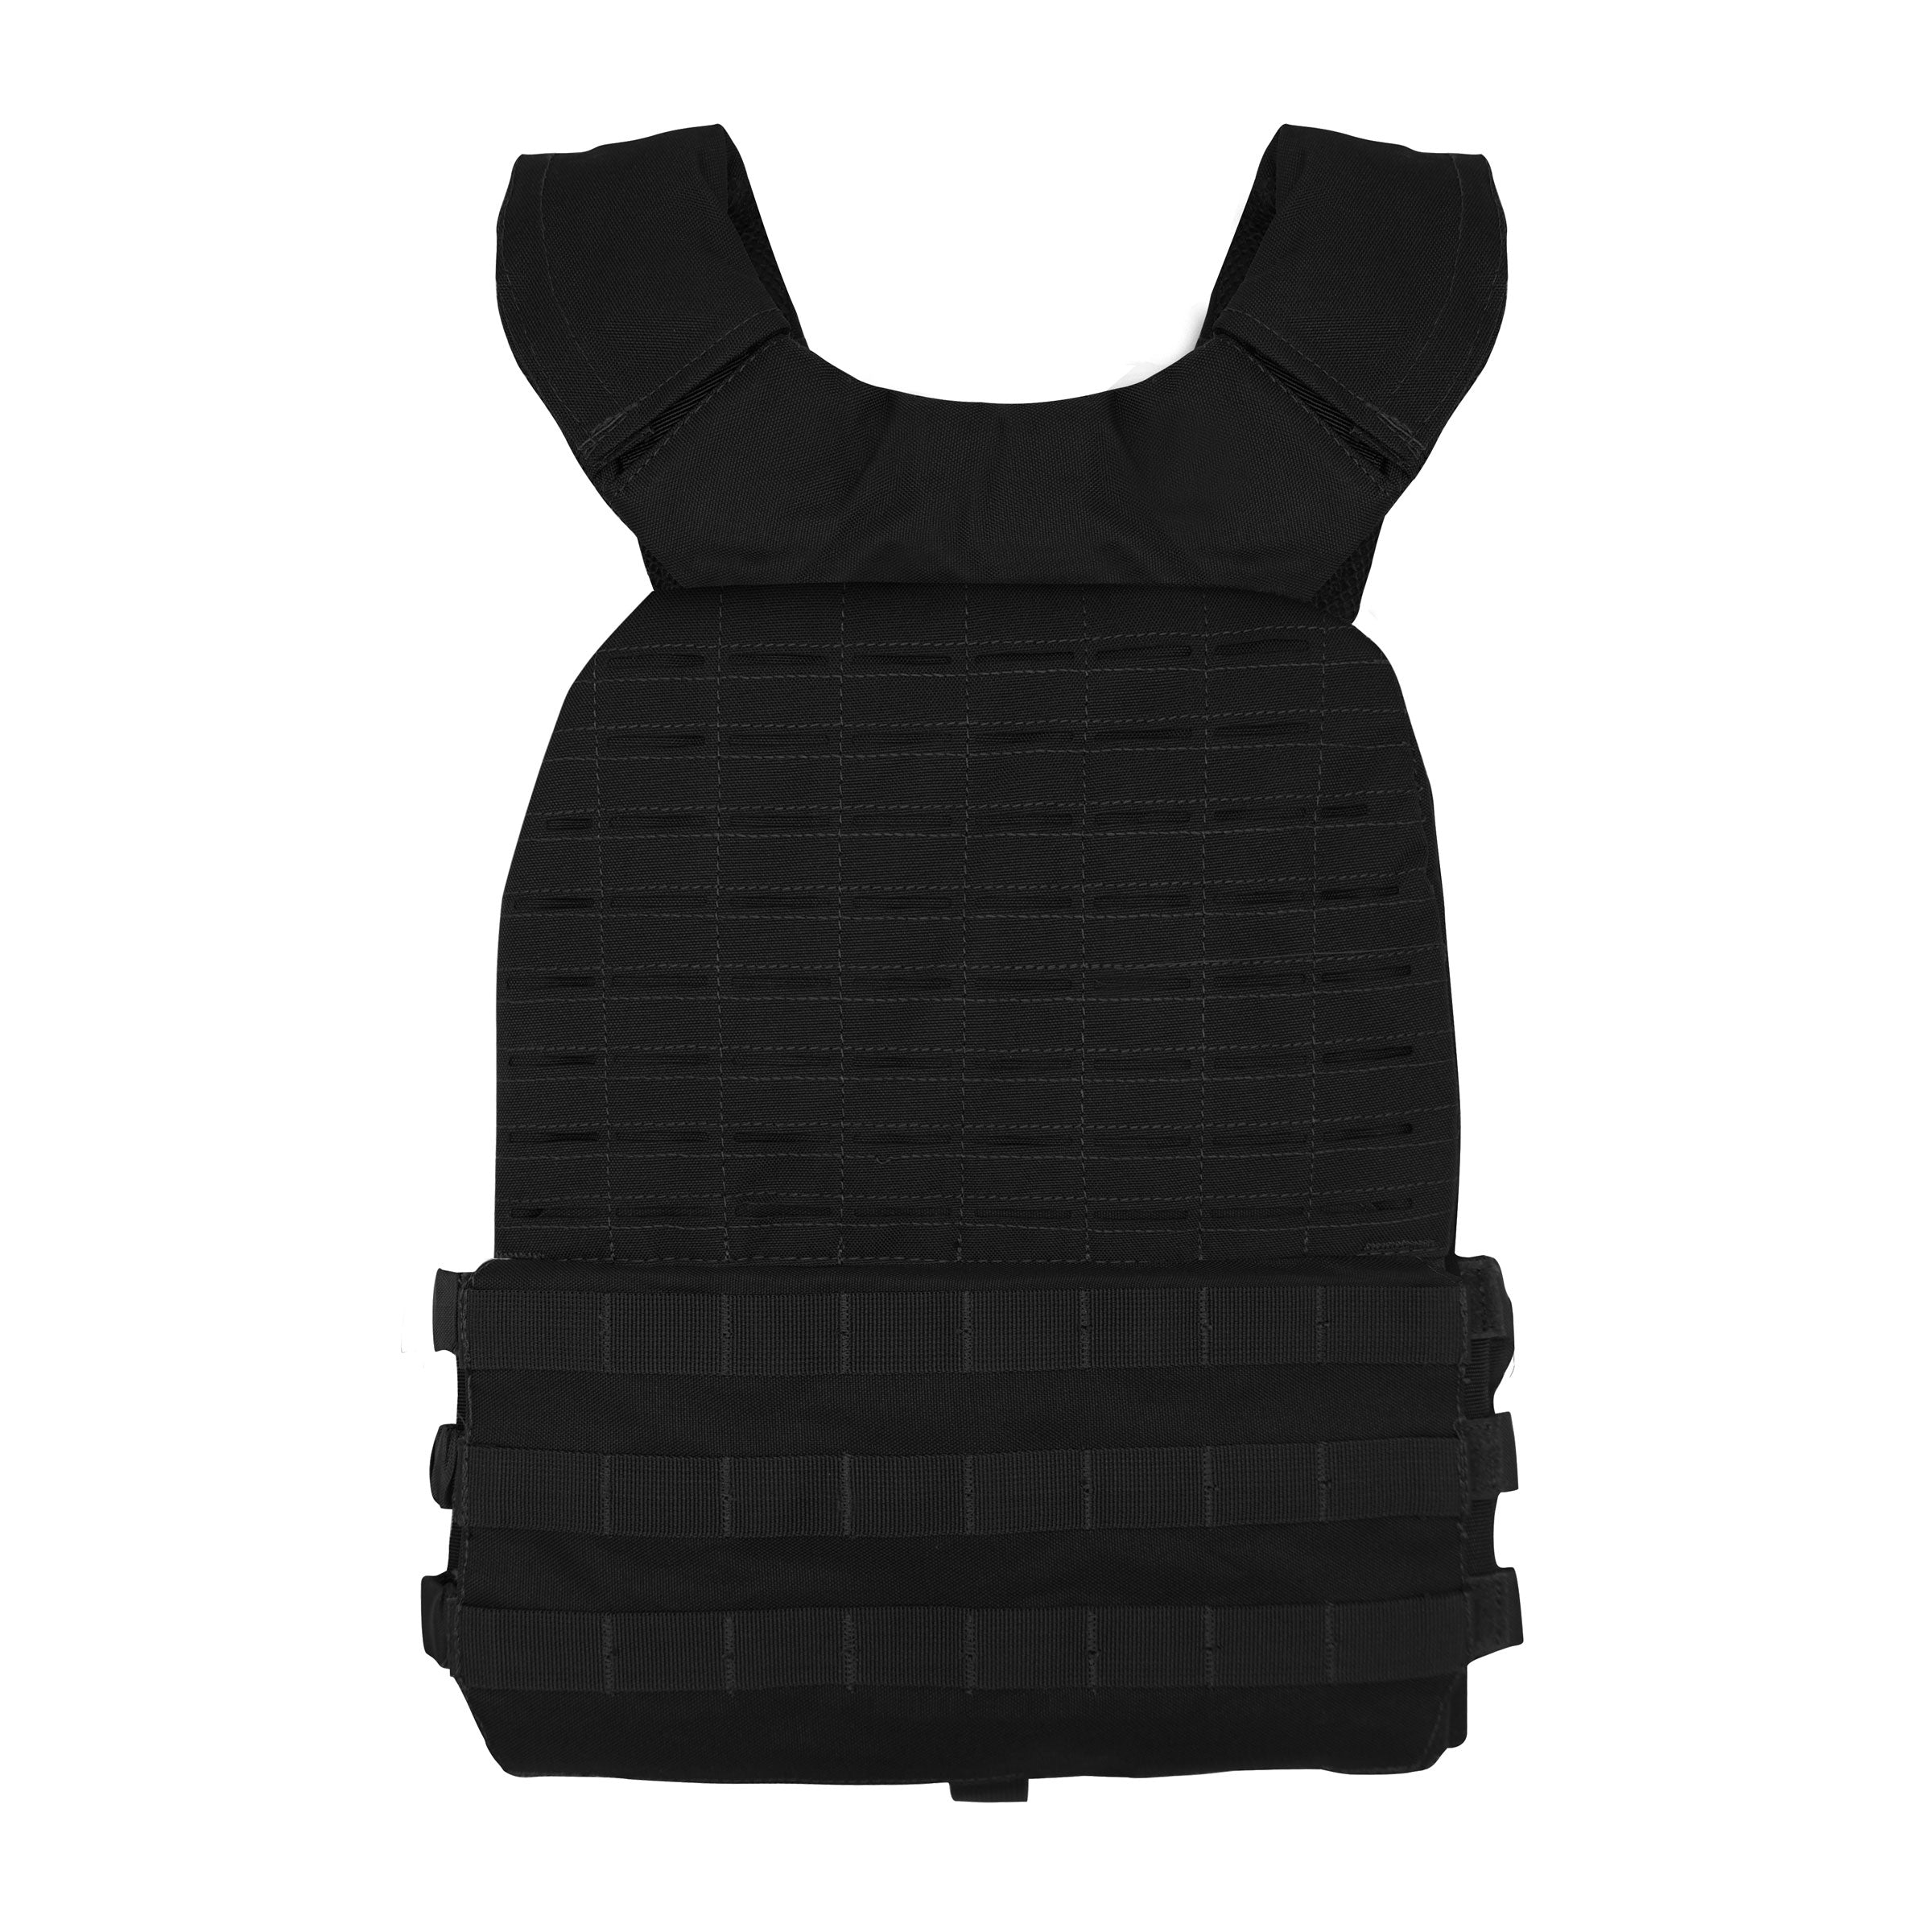 Wolverson Tactical Weight Vest - Wolverson Fitness